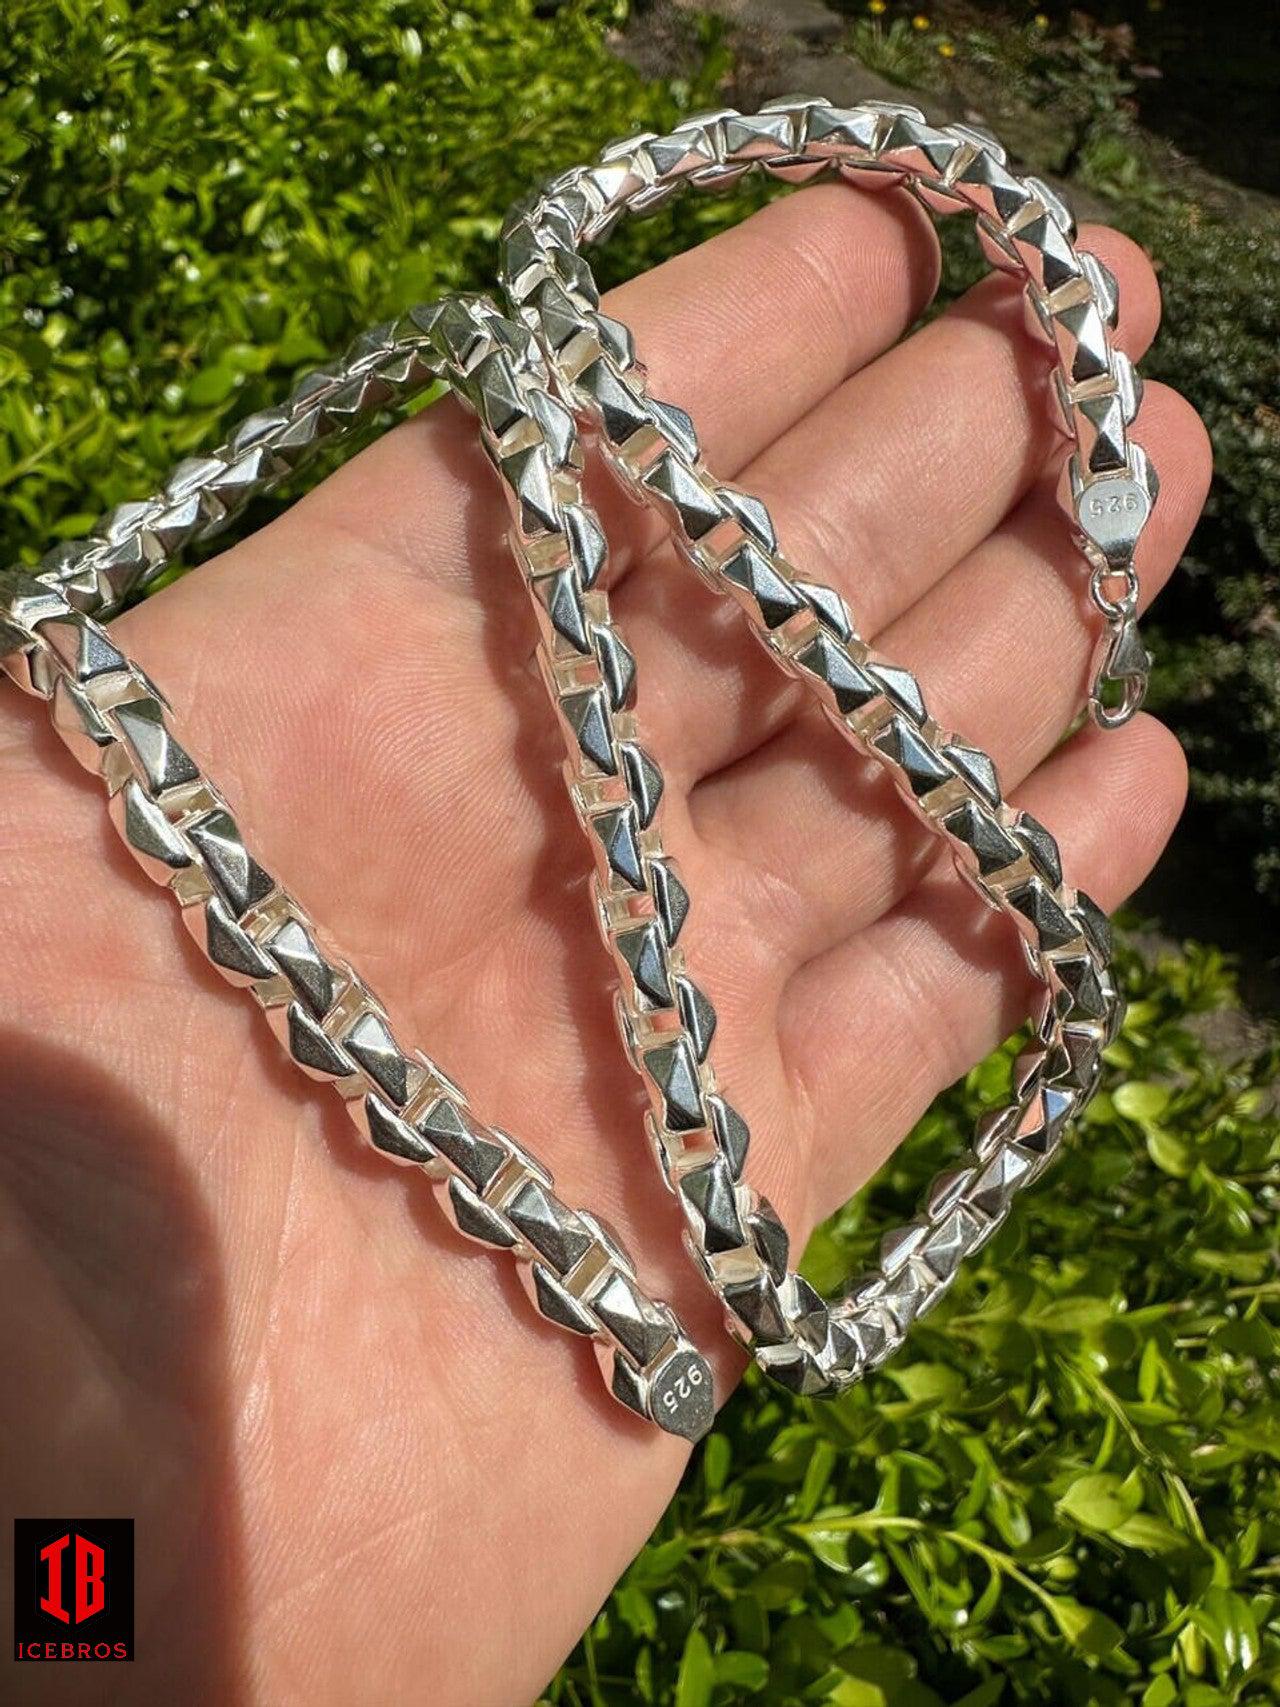 Men's Chain / Silver 8mm Rolo Chain Necklace for Women or Men